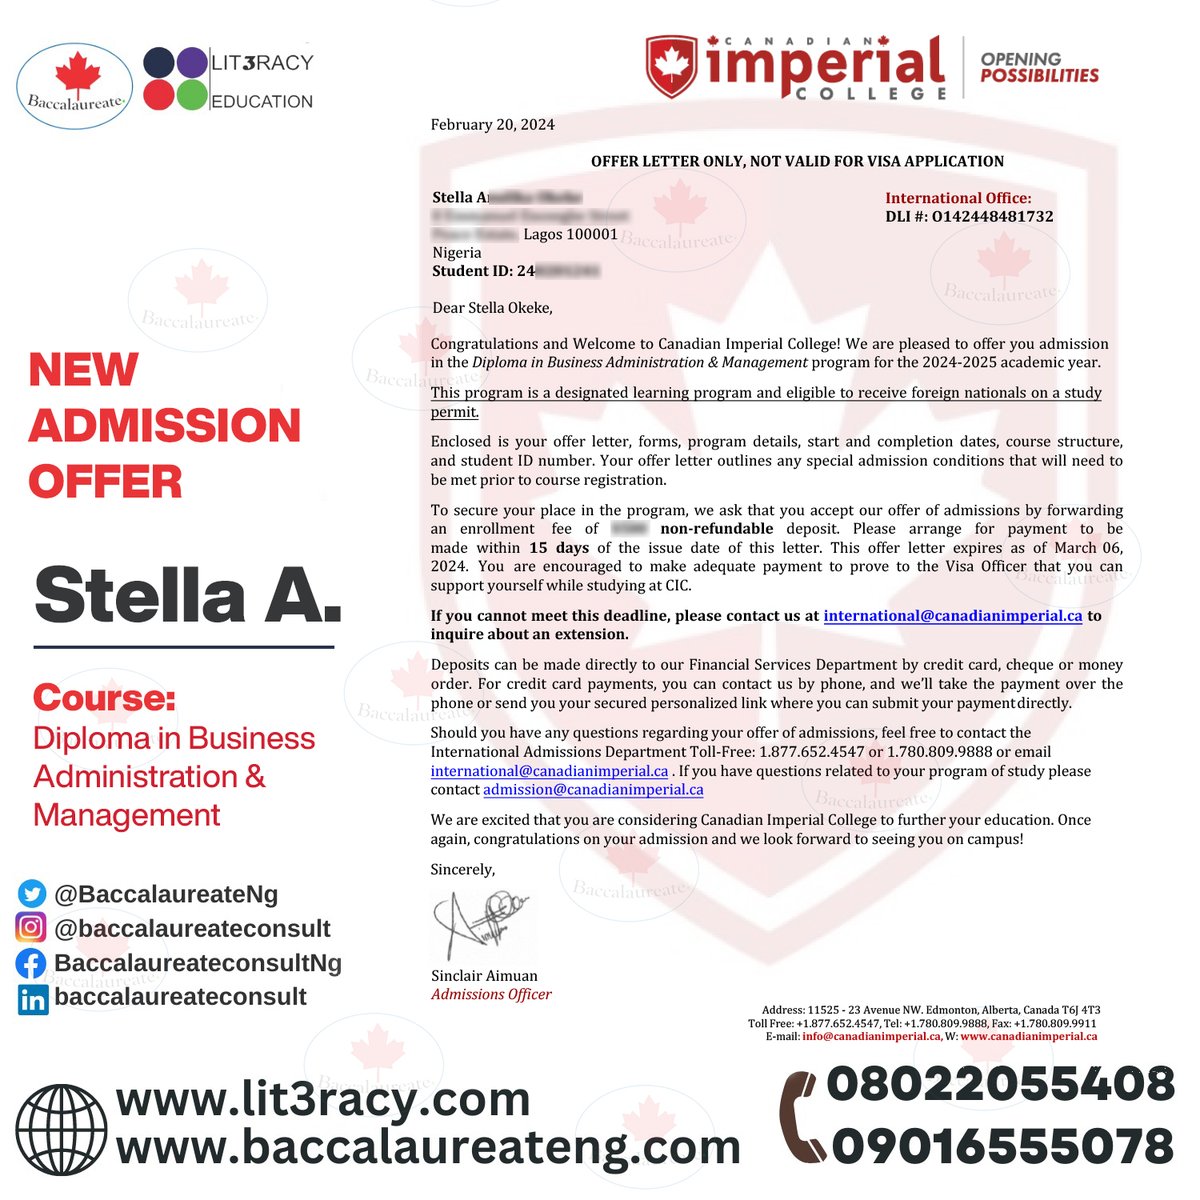 🎉 Big congrats to Stella for securing admission to Imperial College Canada for Business Administration. This is just the beginning of many incredible achievements ahead! 💪🎓.

#SuccessStory #EducationGoals #ImperialCollegeCanada #BusinessAdministration #FutureLeaders